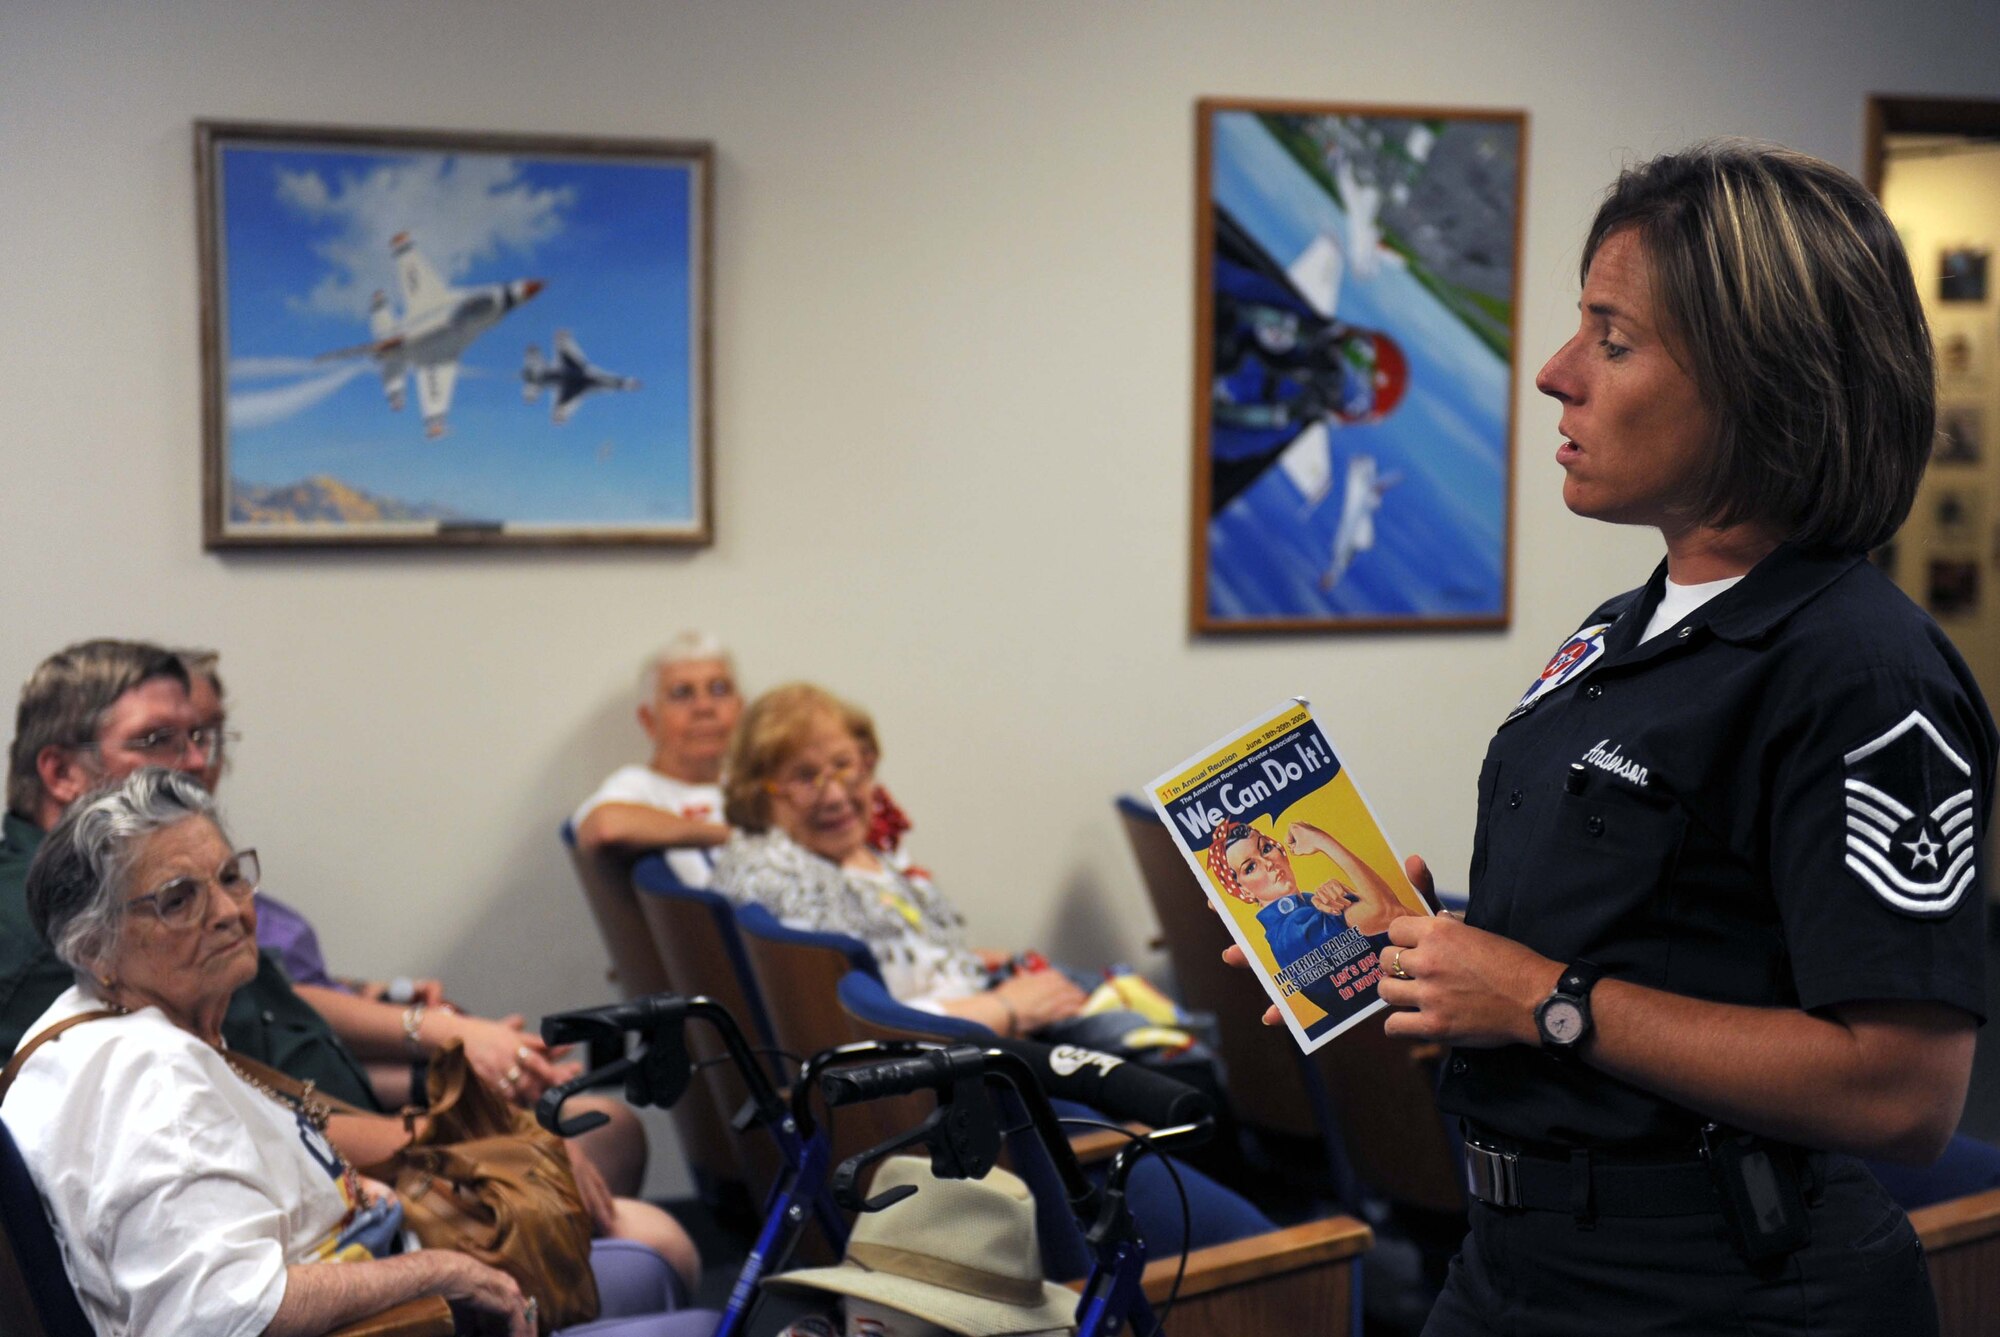 Master Sgt. Pamela Anderson, United States Air Force Air Demonstration Squadron "Thunderbirds" public affairs superintendent, briefs members of the American Rosie the Riveter Association about Thunderbird history at Nellis Air Force Base, Nev., June 19. Rosie the Riveter is a cultural icon of the United States, representing the American women who worked in war factories and assumed job positions in the places of male workers who were in the military during World War II. (U.S. Air Force Photo/Senior Airman Larry E. Reid Jr.)